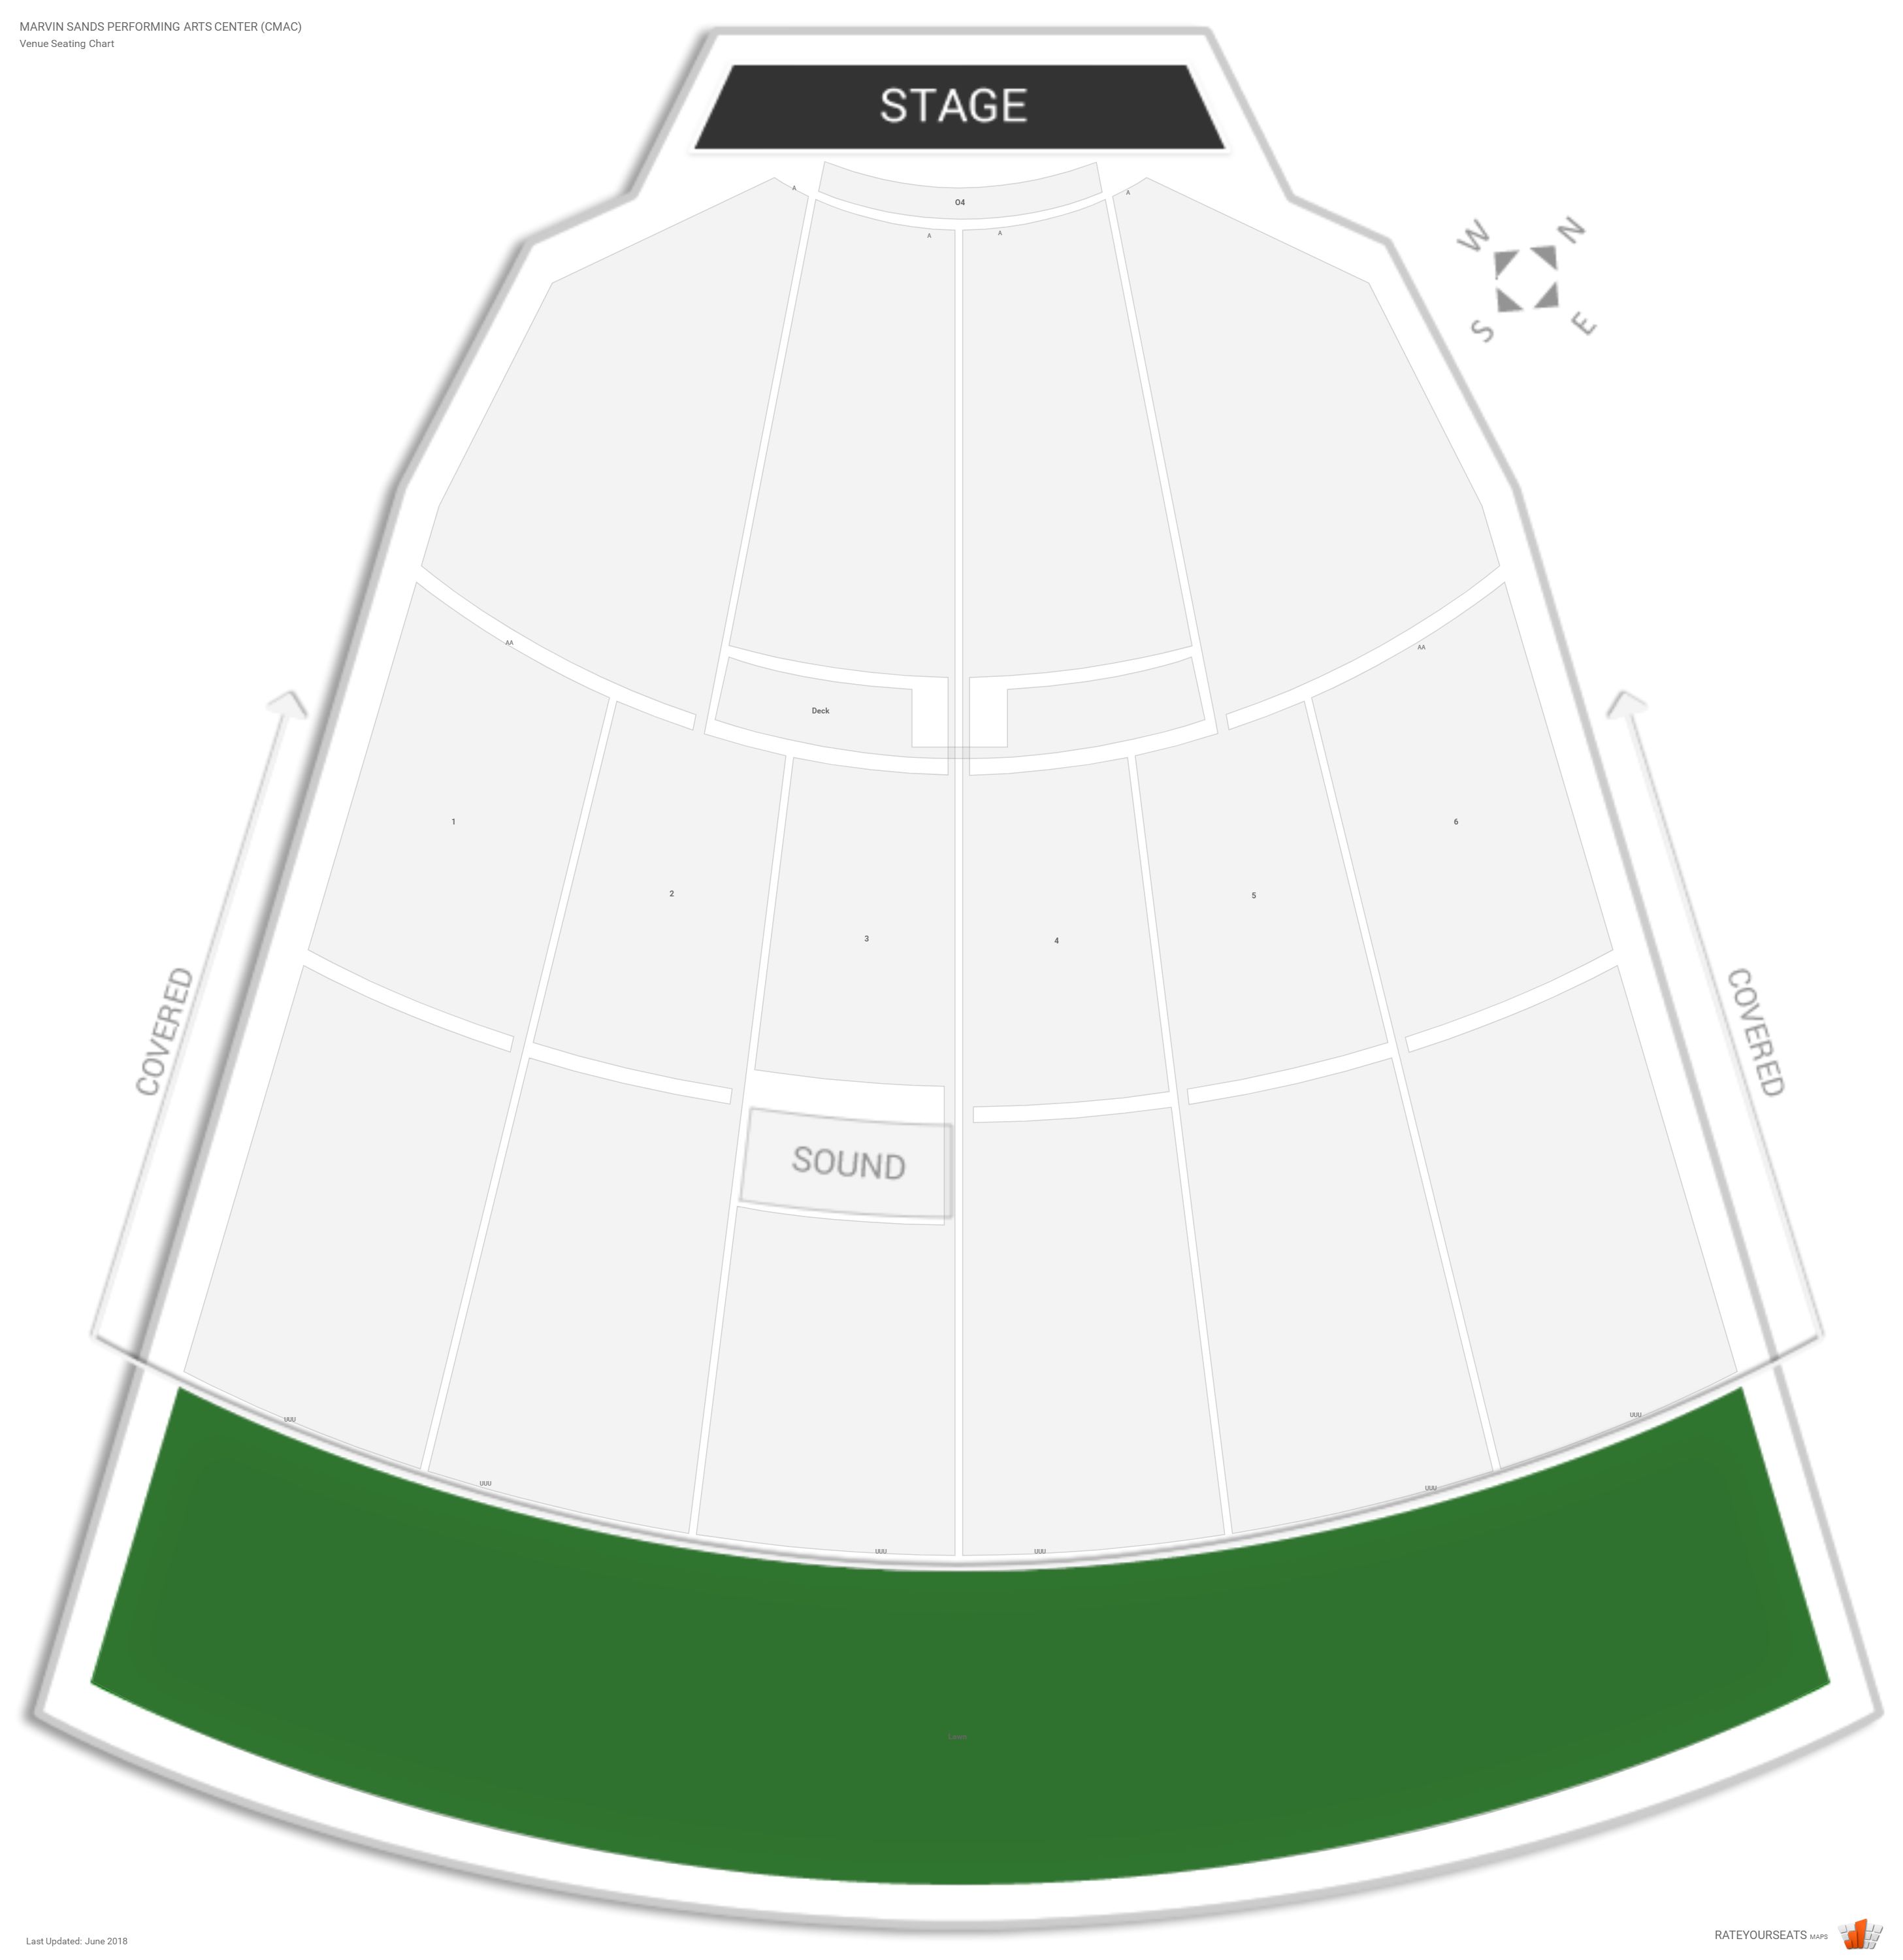 Cmac Seating Chart With Rows And Seat Numbers